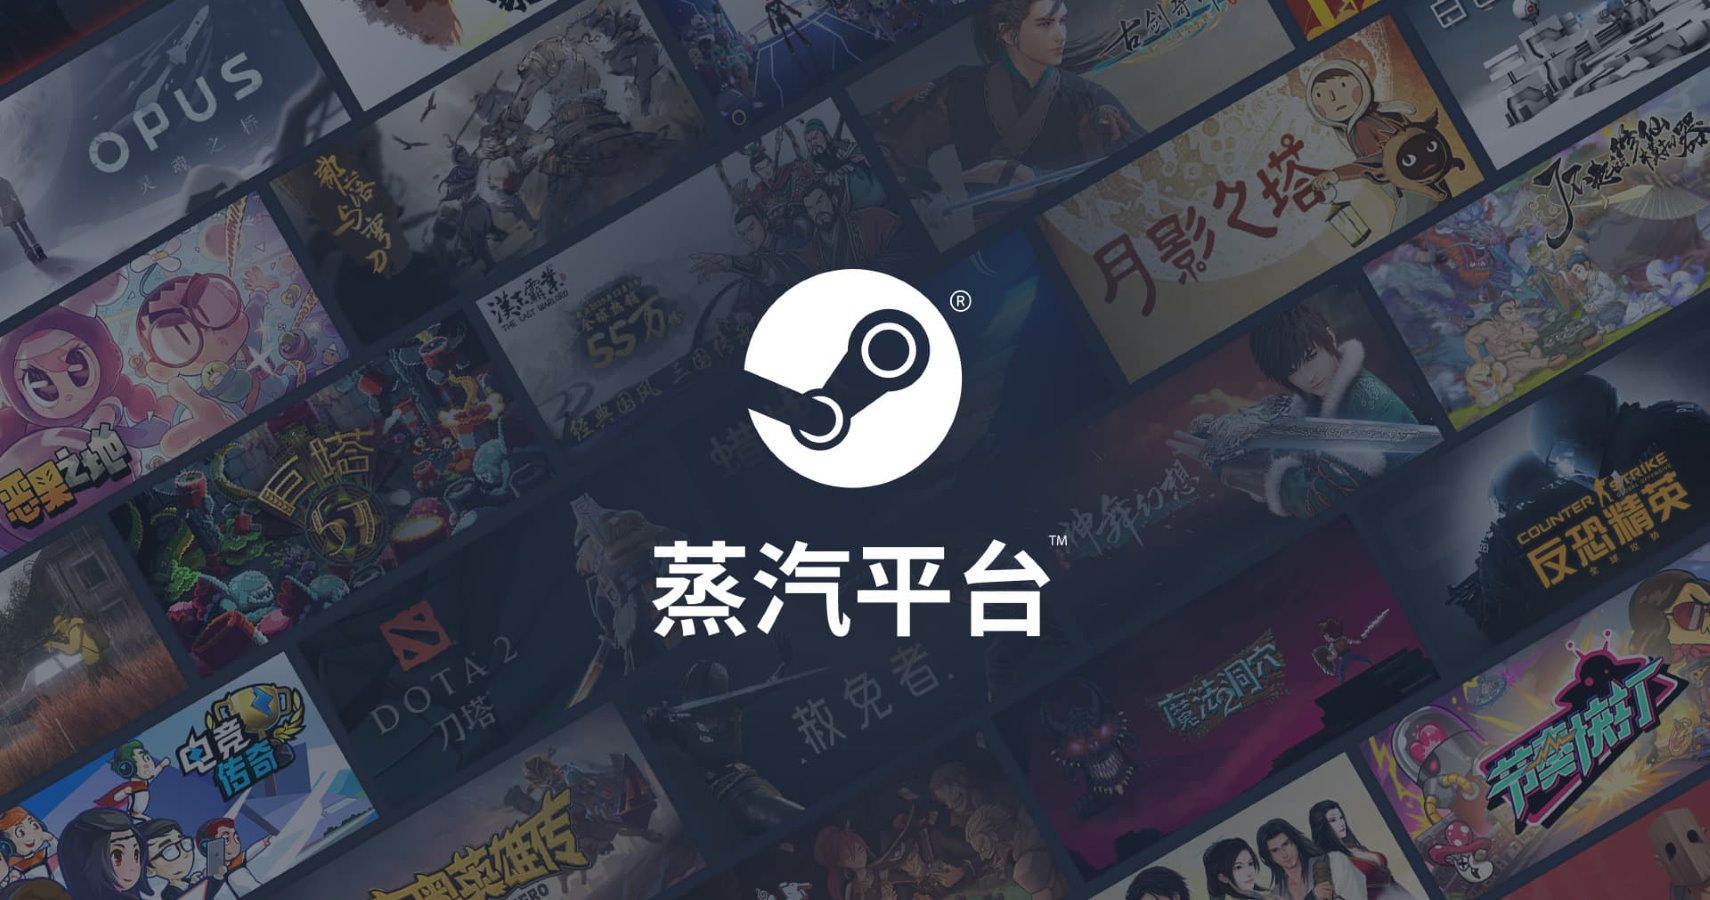 Steam China Officially Launches Today